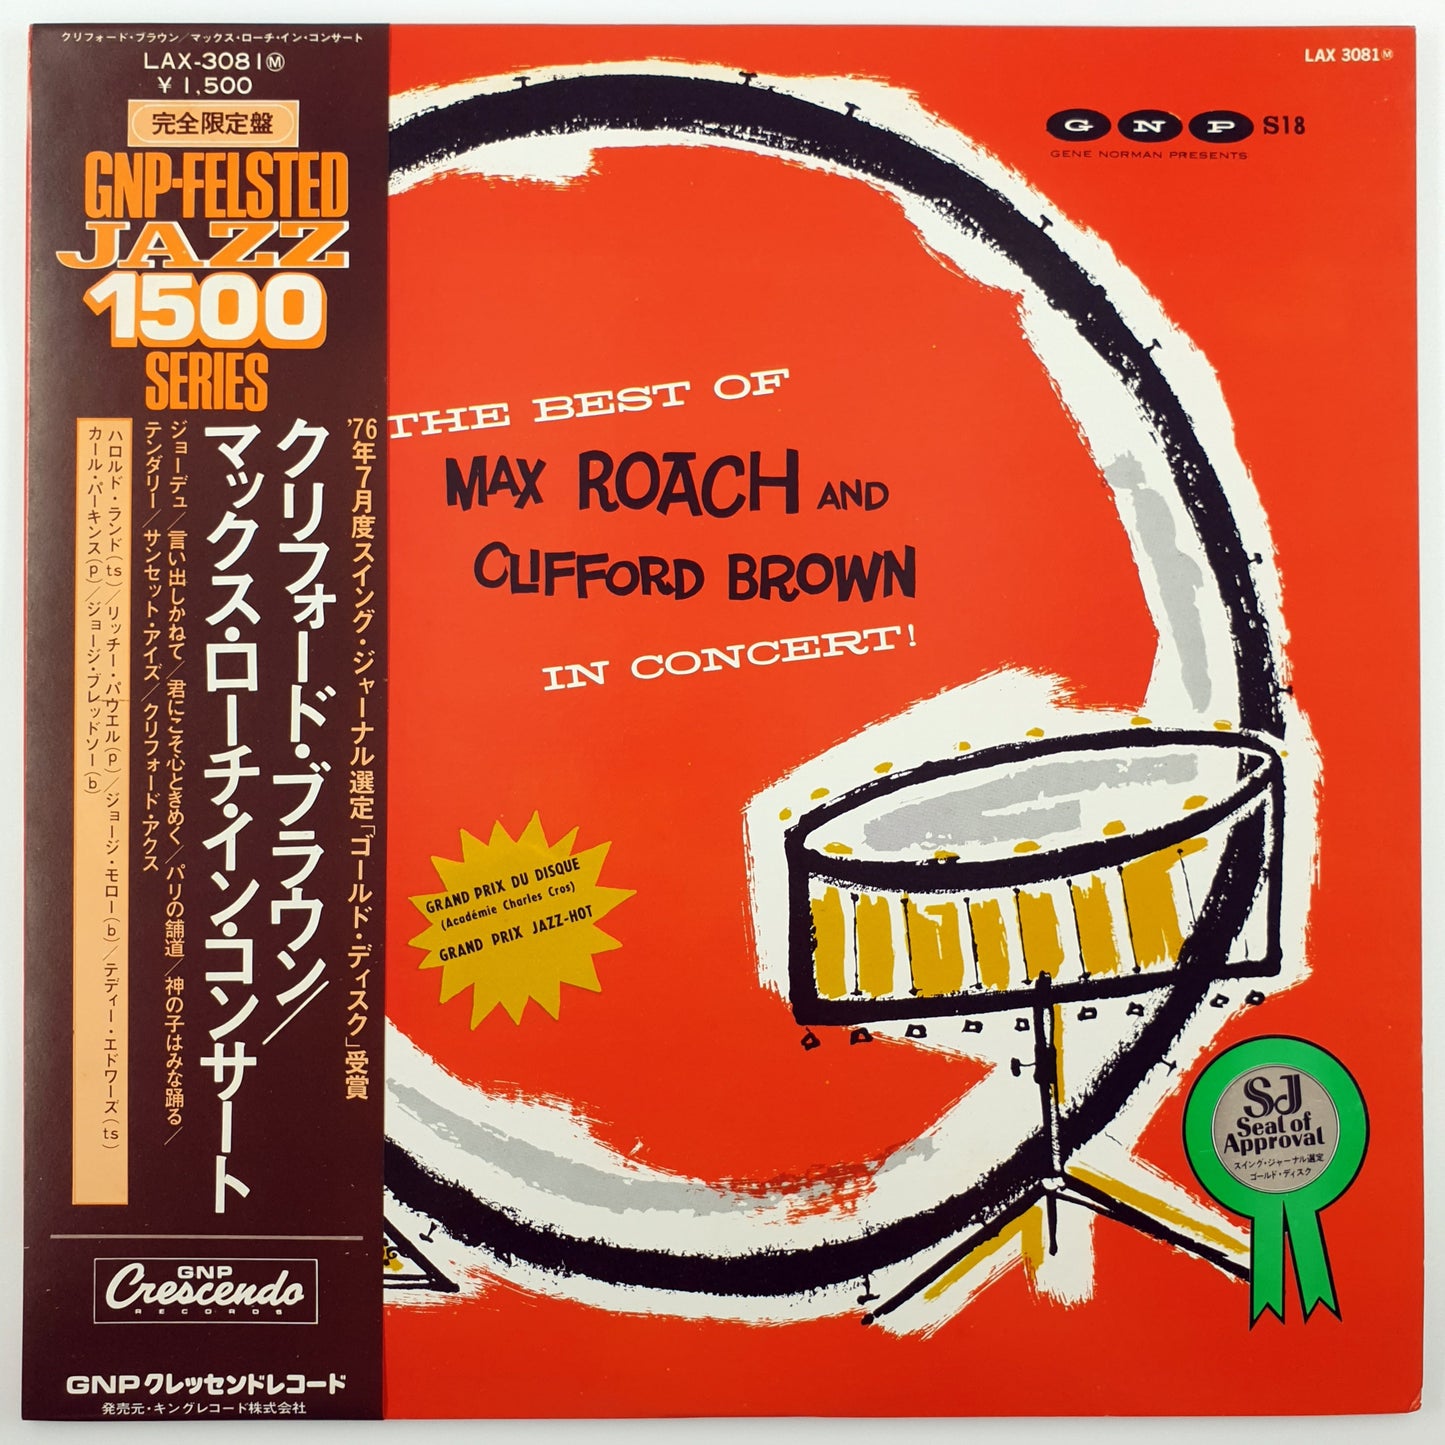 Max Roach And Clifford Brown – The Best Of Max Roach And Clifford Brown In Concert!